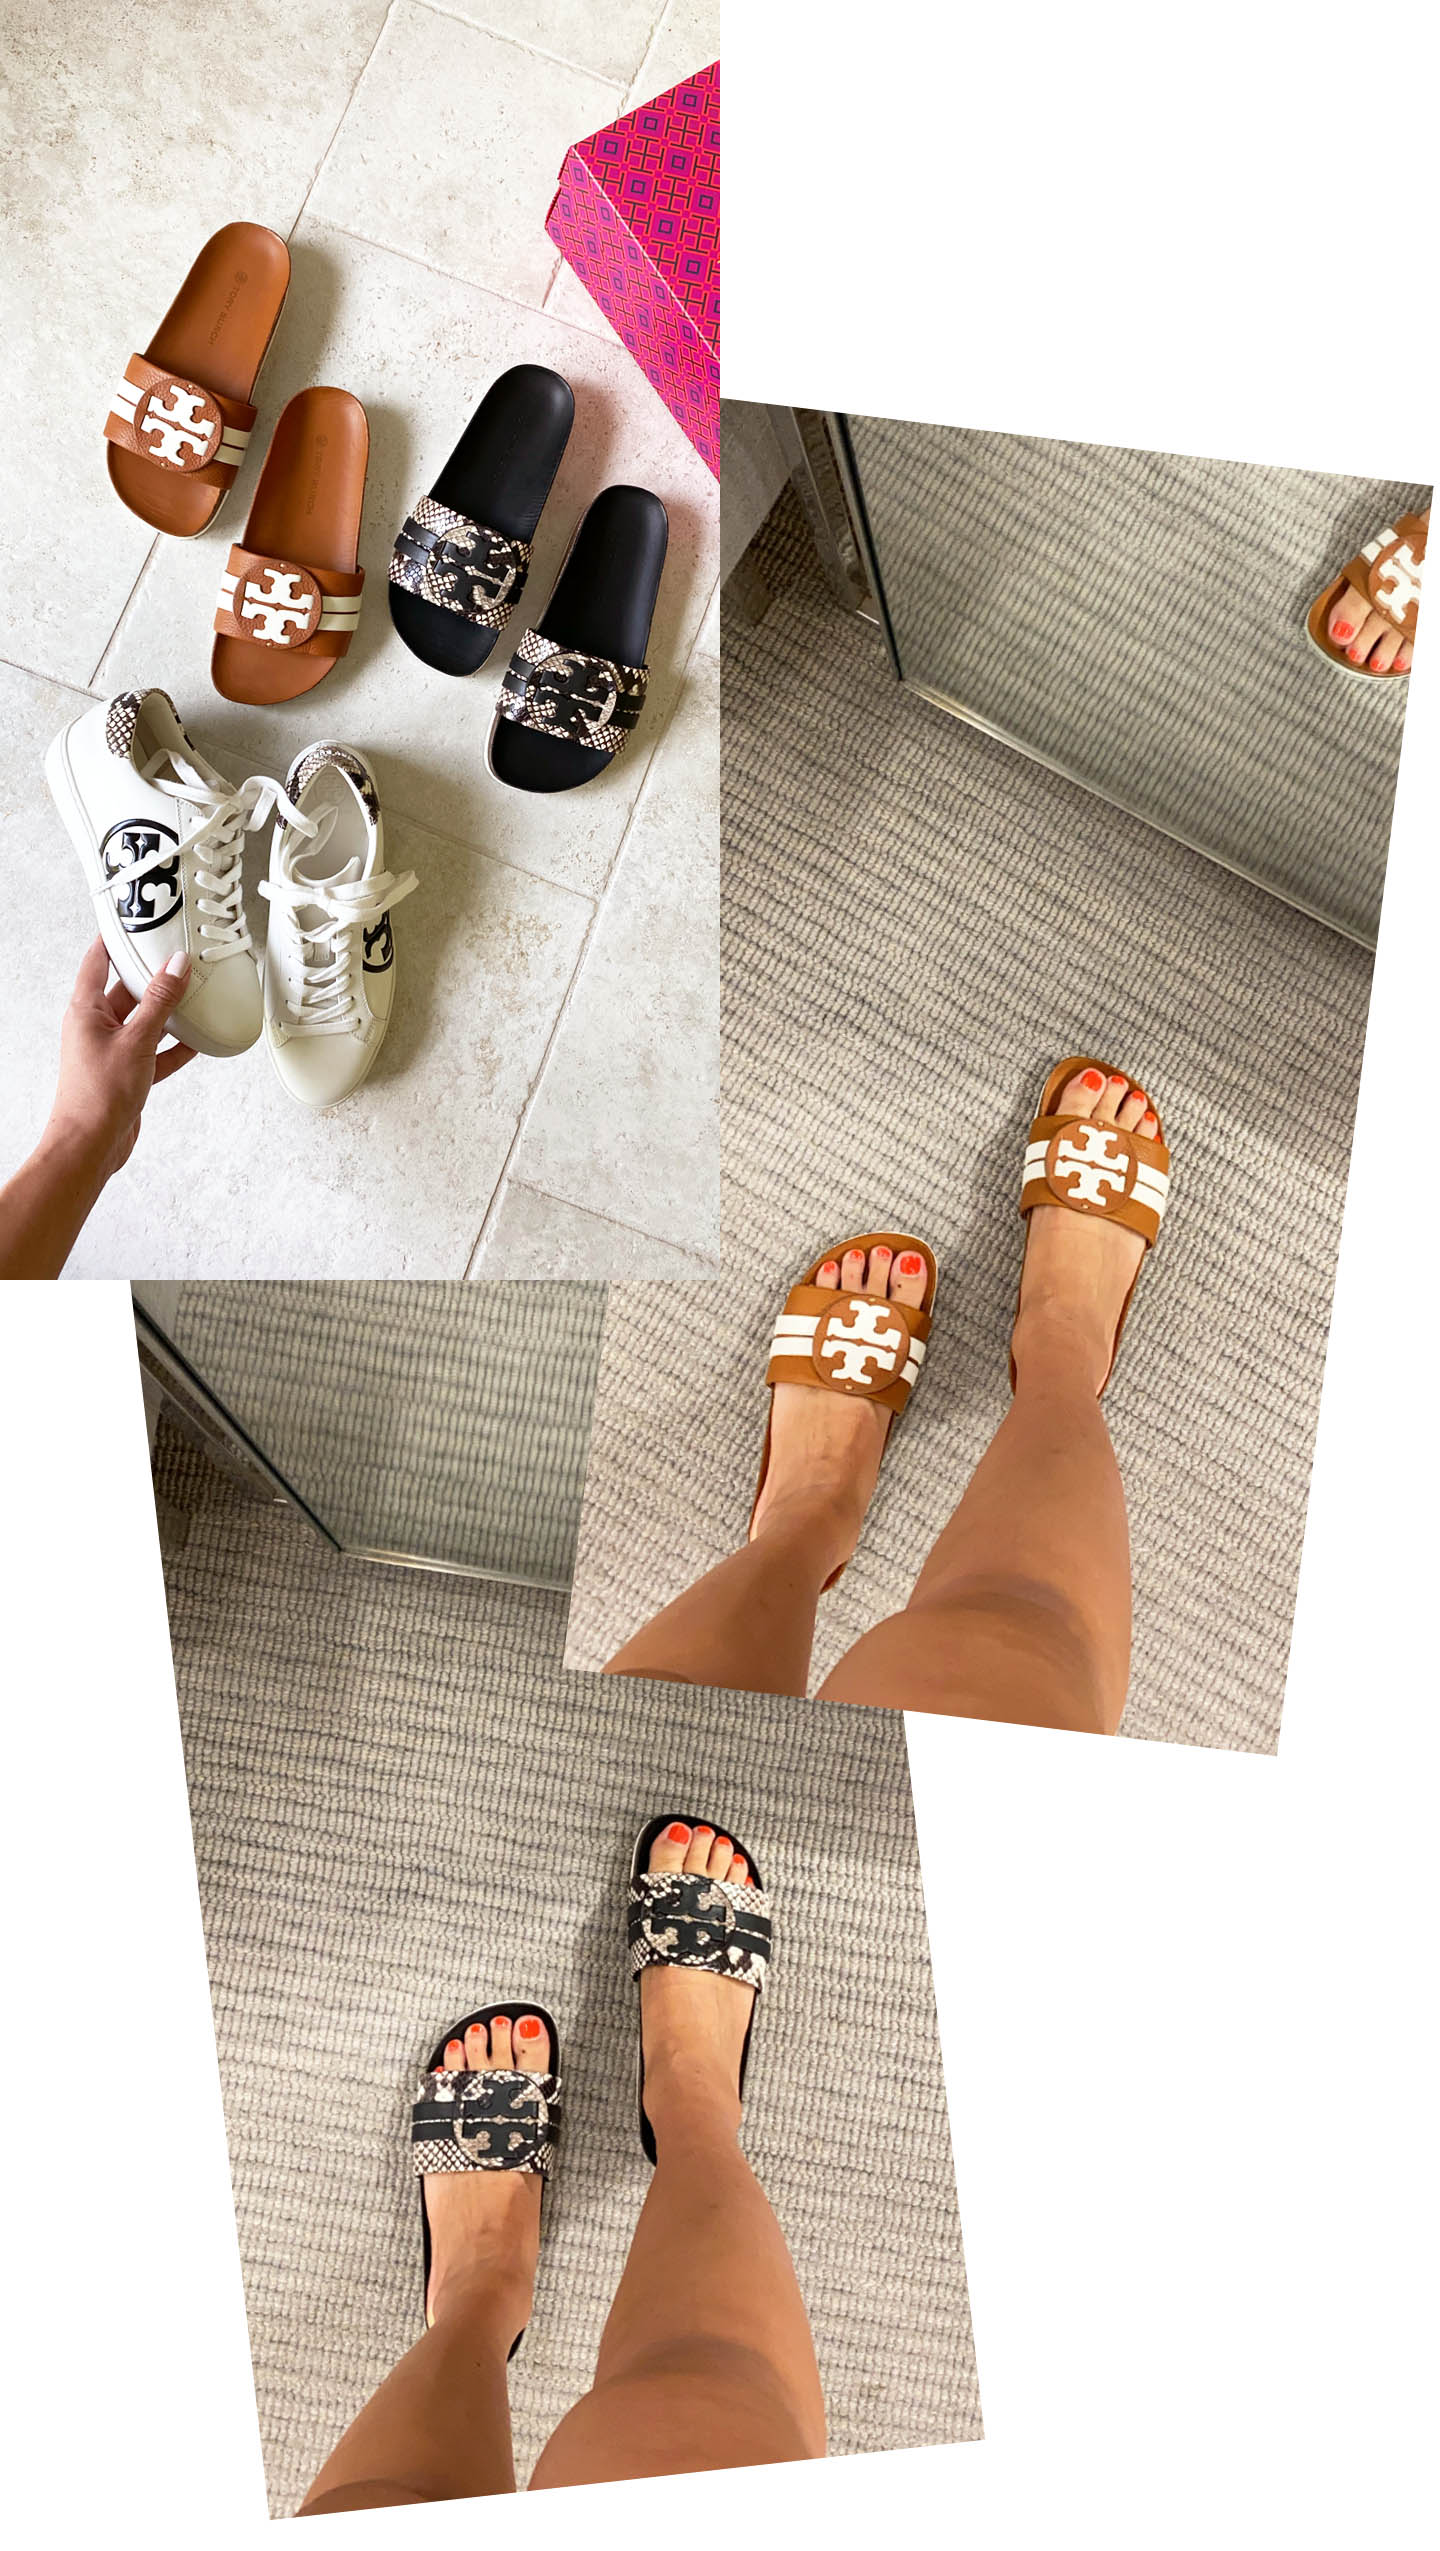 Tory Burch Leigh Slides Nordstrom Sale 2020